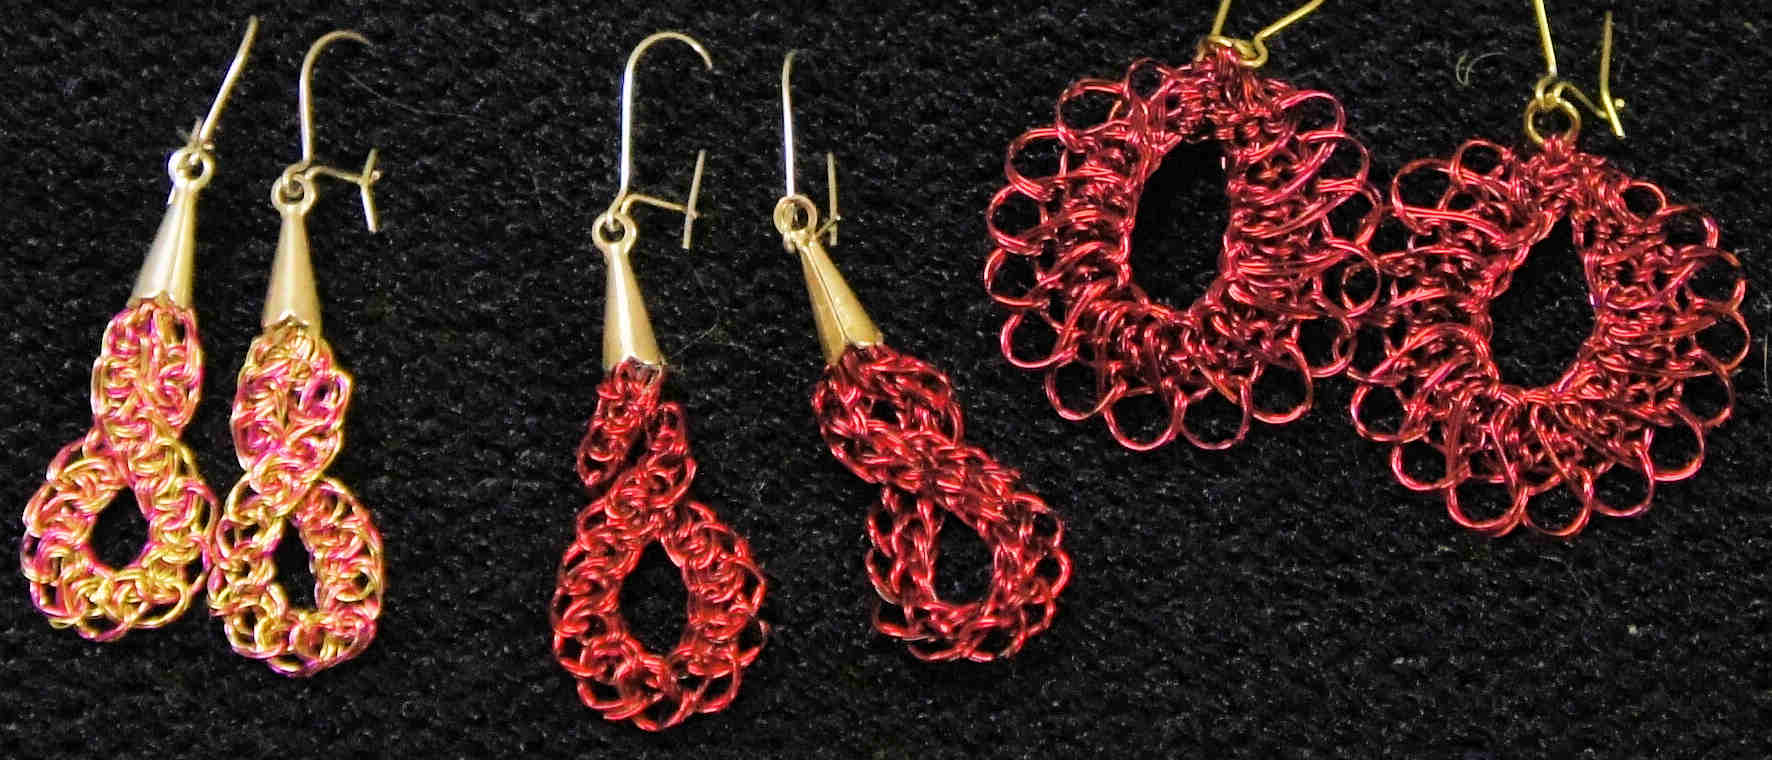 Closeup of knitted earrings